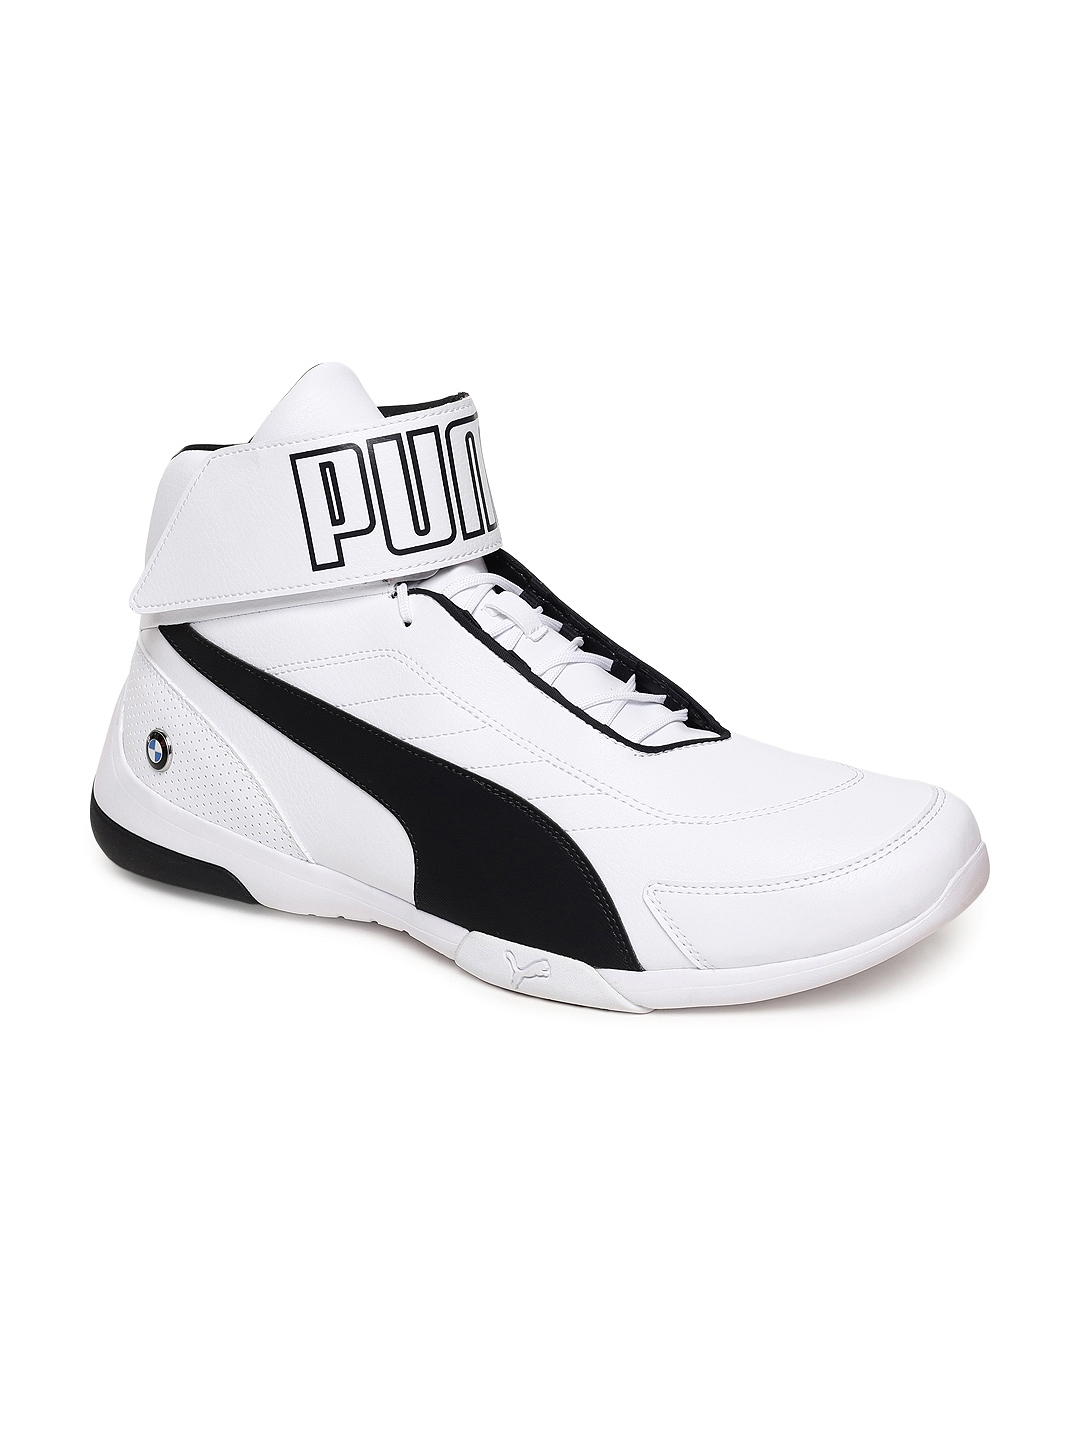 Puma BMW MMS Track Racer Men Racing Casual White Trainer Sneaker Athletic  Shoes